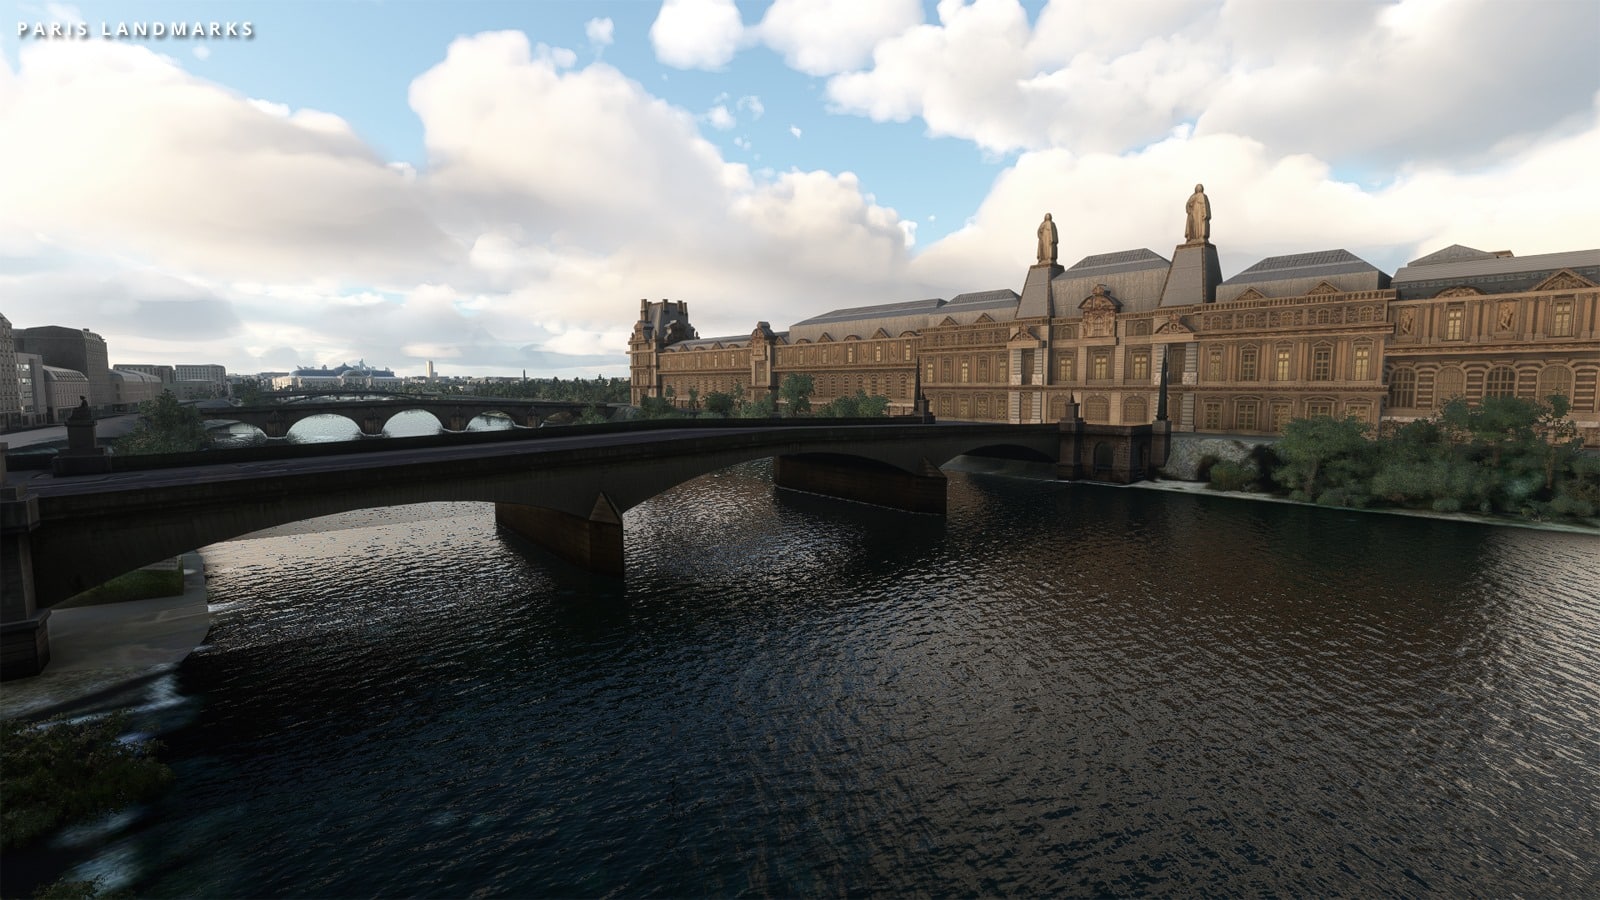 Prealsoft Releases Paris Landmarks for MSFS - PrealSoft